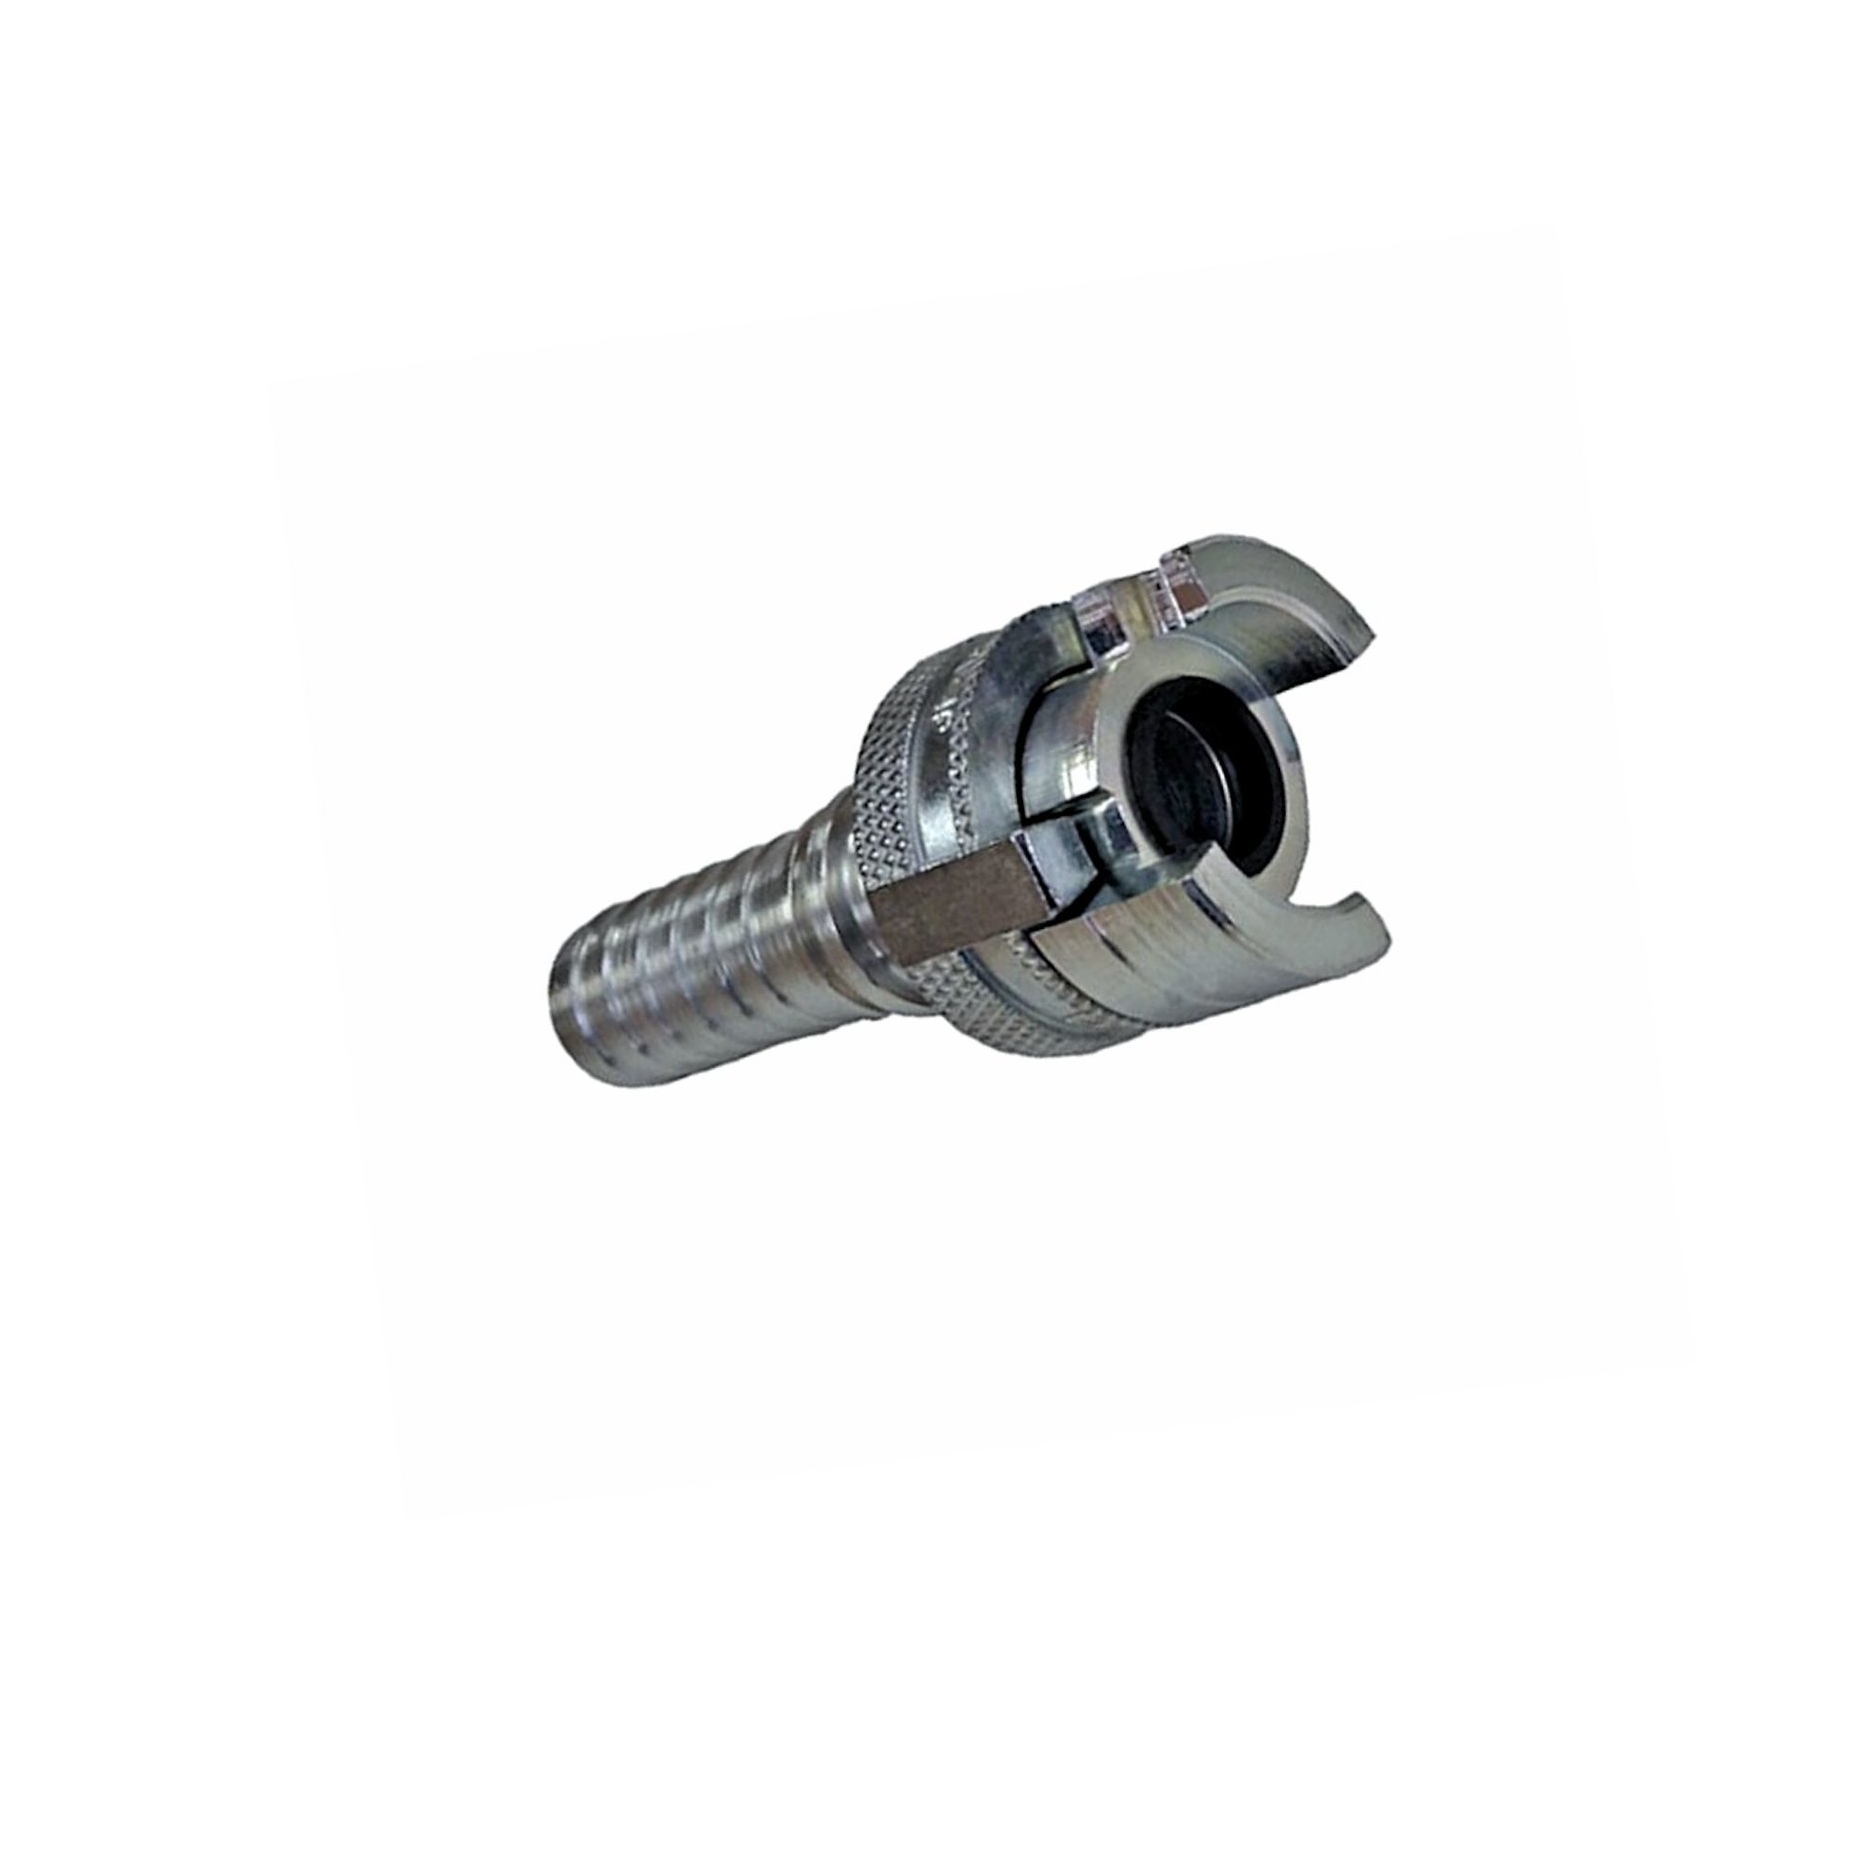 1/2" Male NPT Universal Crowfoot Coupling Chicago Fitting Plated Iron SFM050 